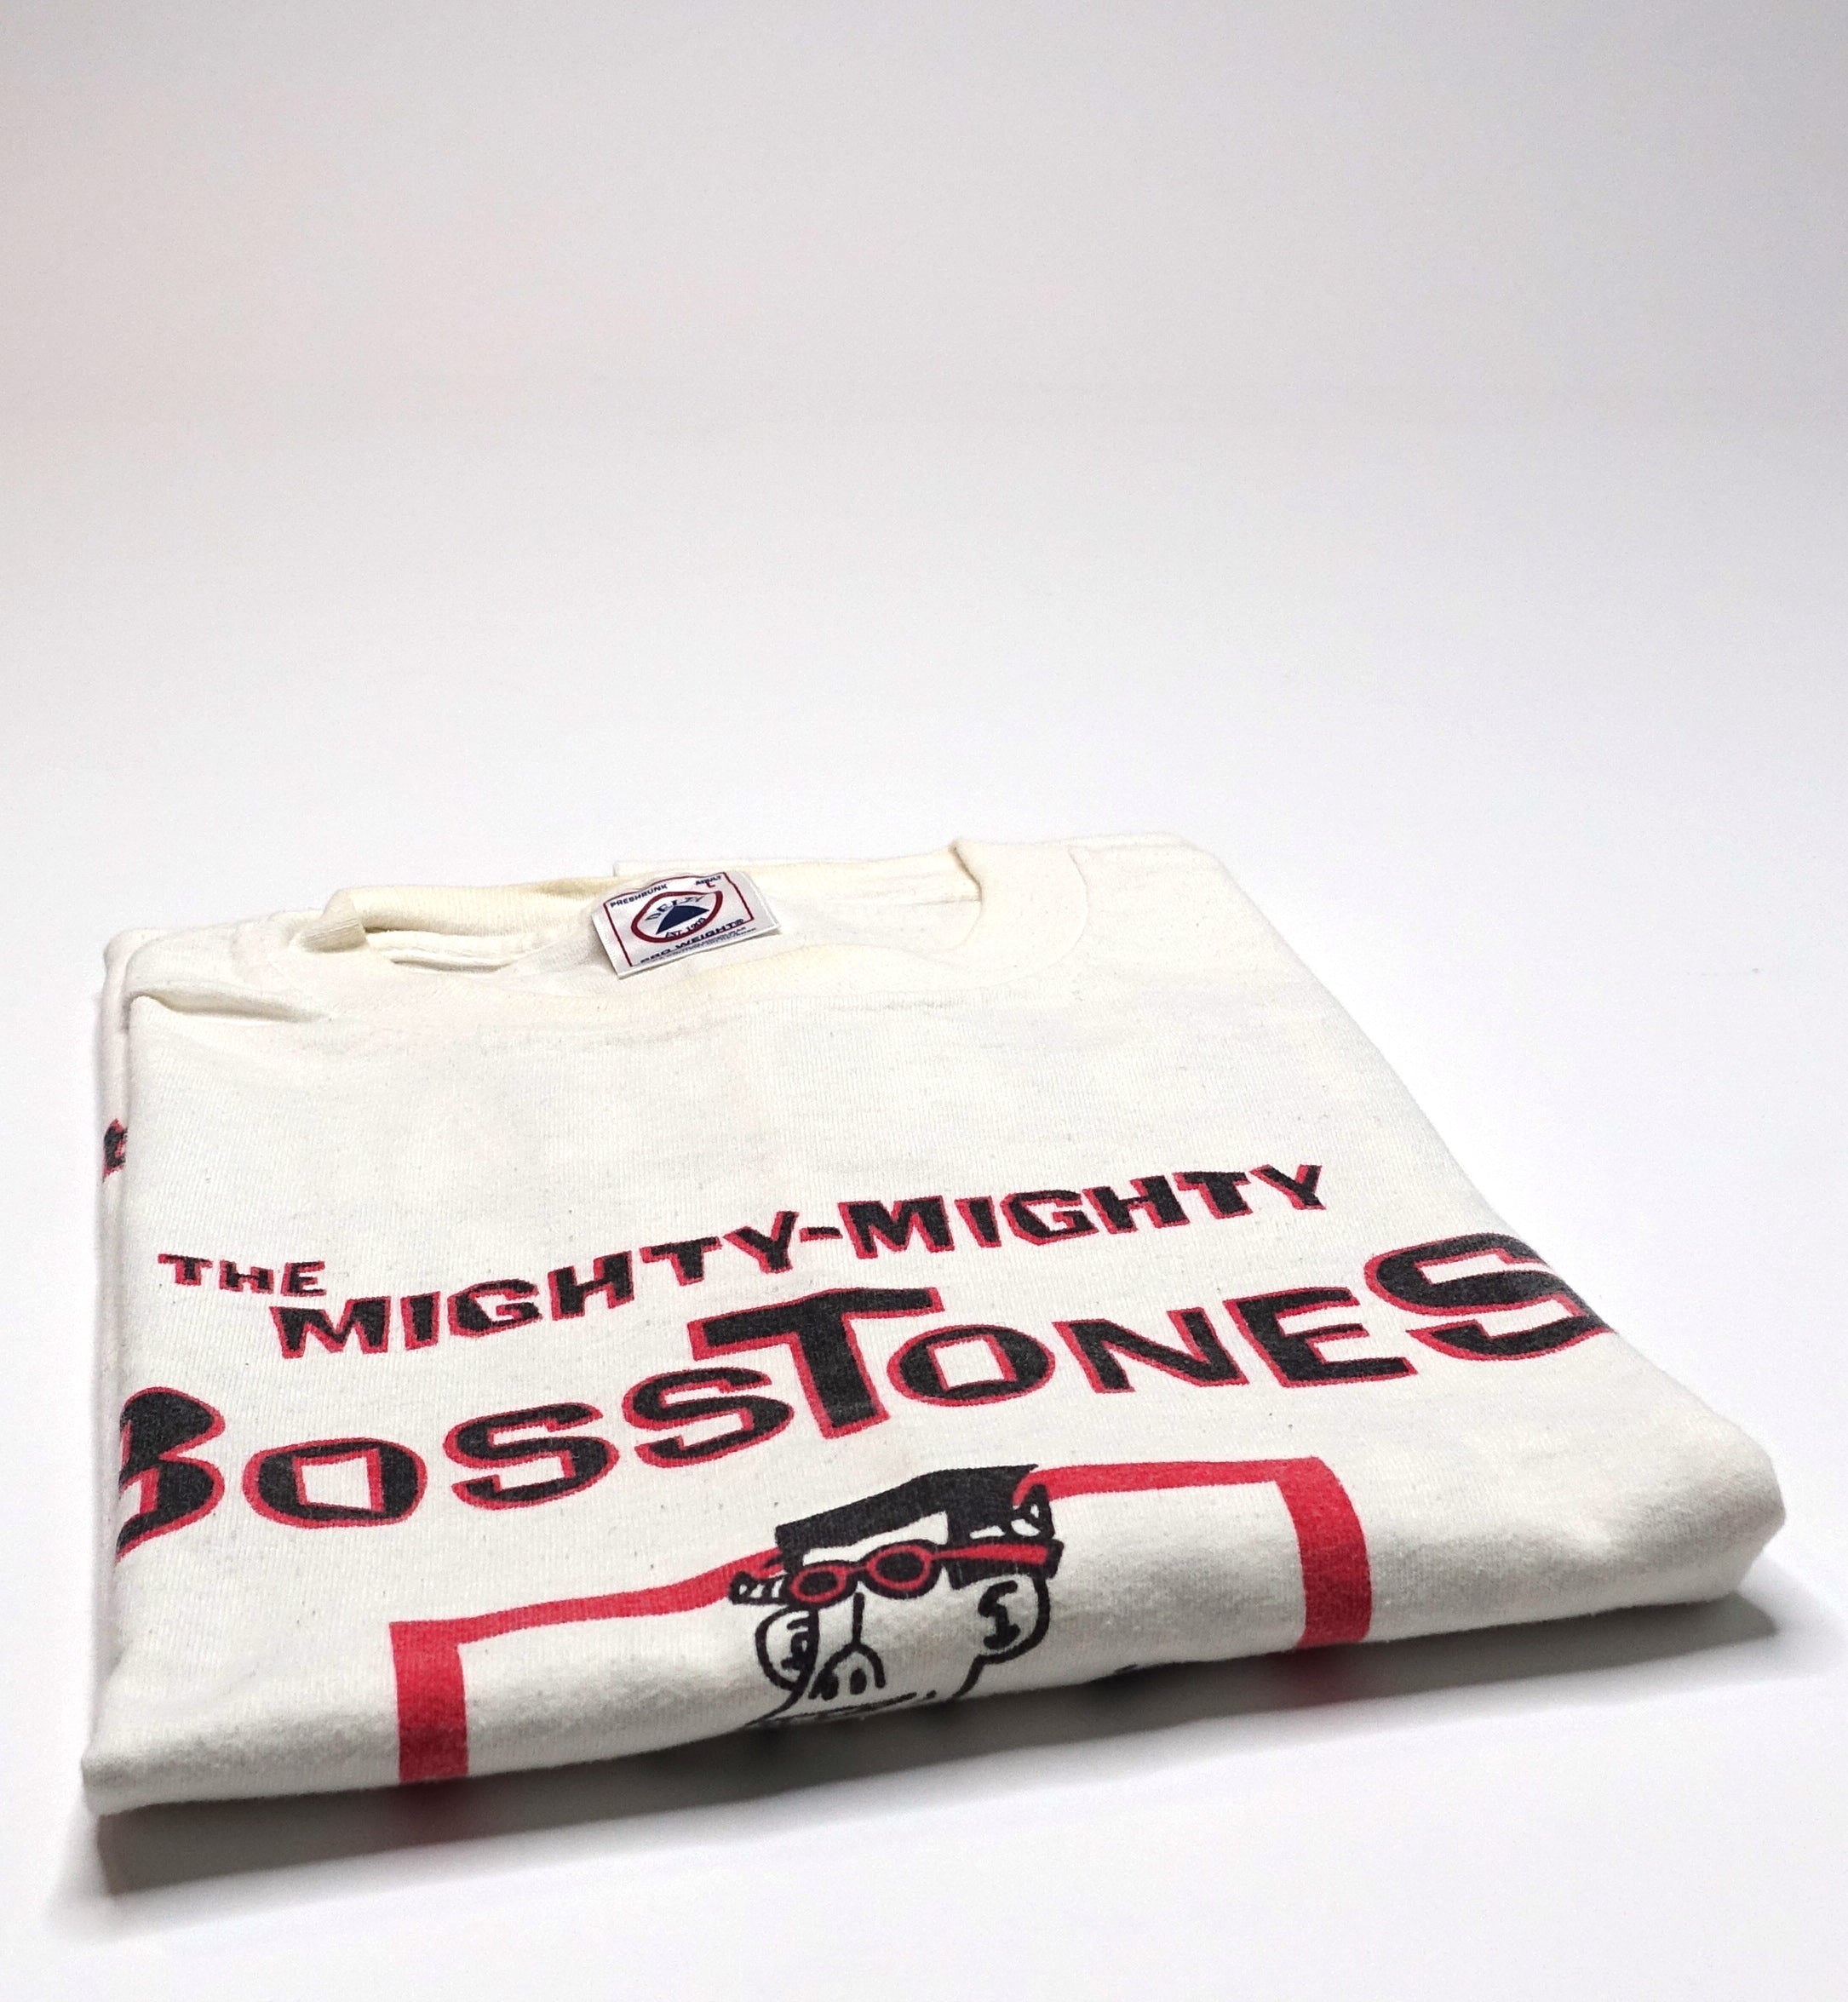 The Mighty Mighty BossToneS ‎– It's a Plaid World 1999 Tour Shirt Size Large